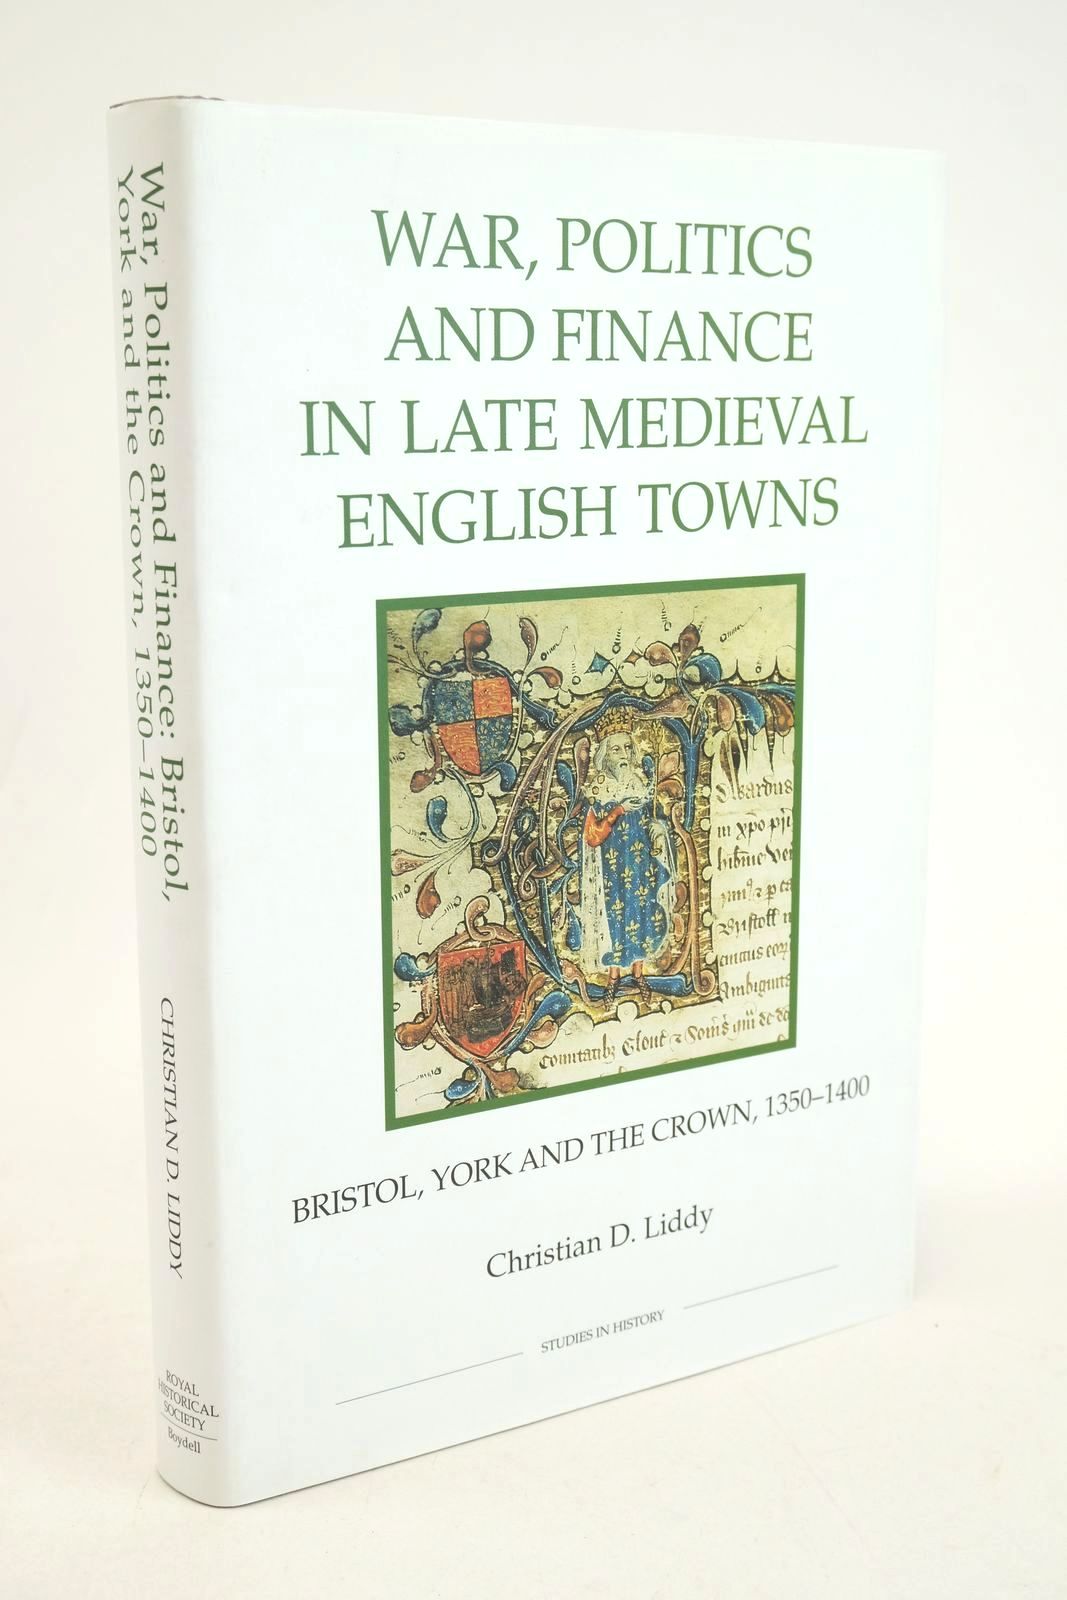 Photo of WAR, POLITICS AND FINANCE IN LATE MEDIEVAL ENGLISH TOWNS written by Liddy, Christian D. published by The Royal Historical Society (STOCK CODE: 1327812)  for sale by Stella & Rose's Books